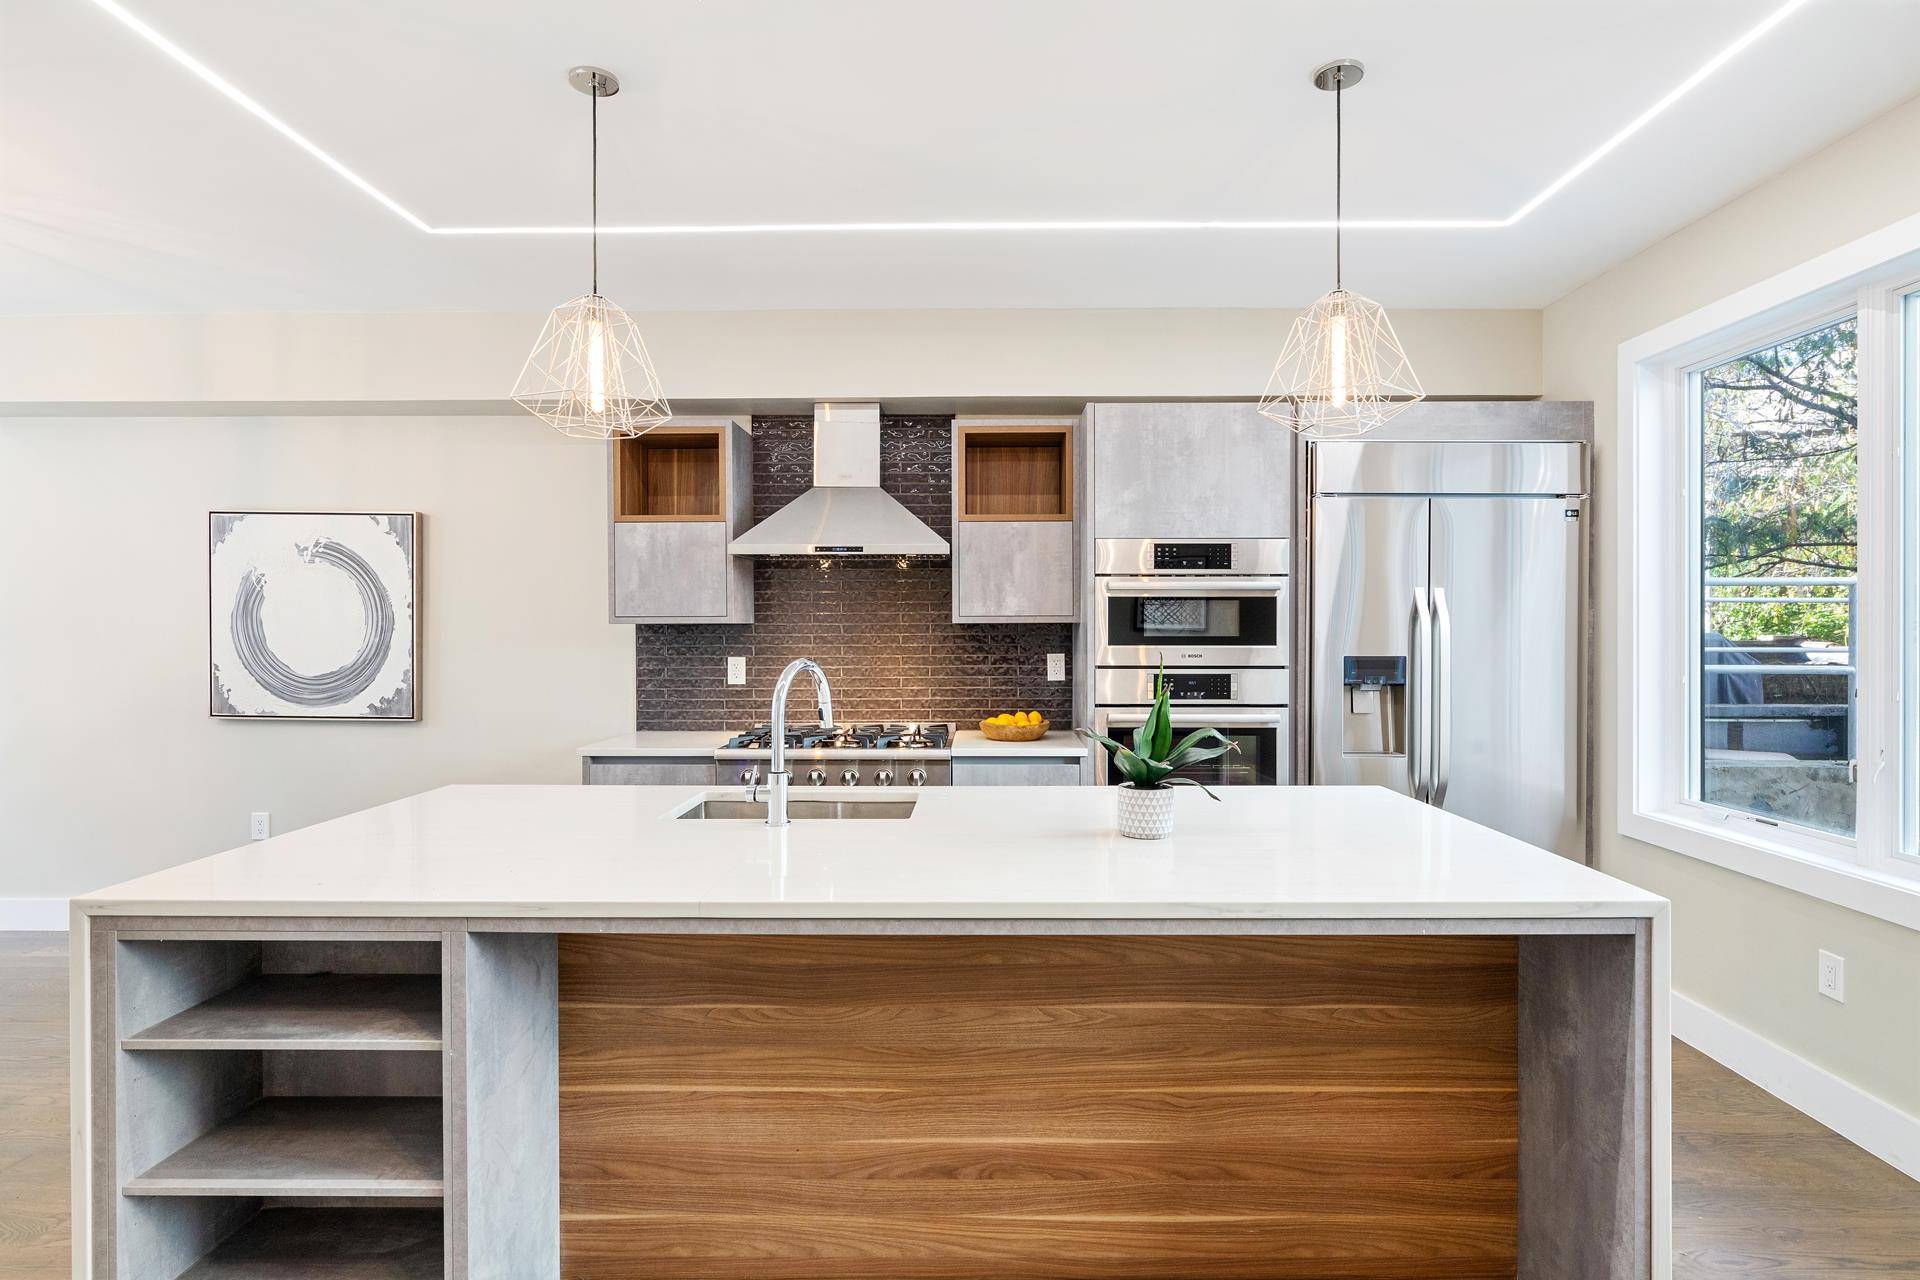 ALL SHOWINGS amp ; OPEN HOUSES ARE APPOINTMENT ONLYbr gt ; 473 Lafayette is a magnificent, fully renovated two family townhouse located between the neighborhoods of Clinton Hill and Bedford ...